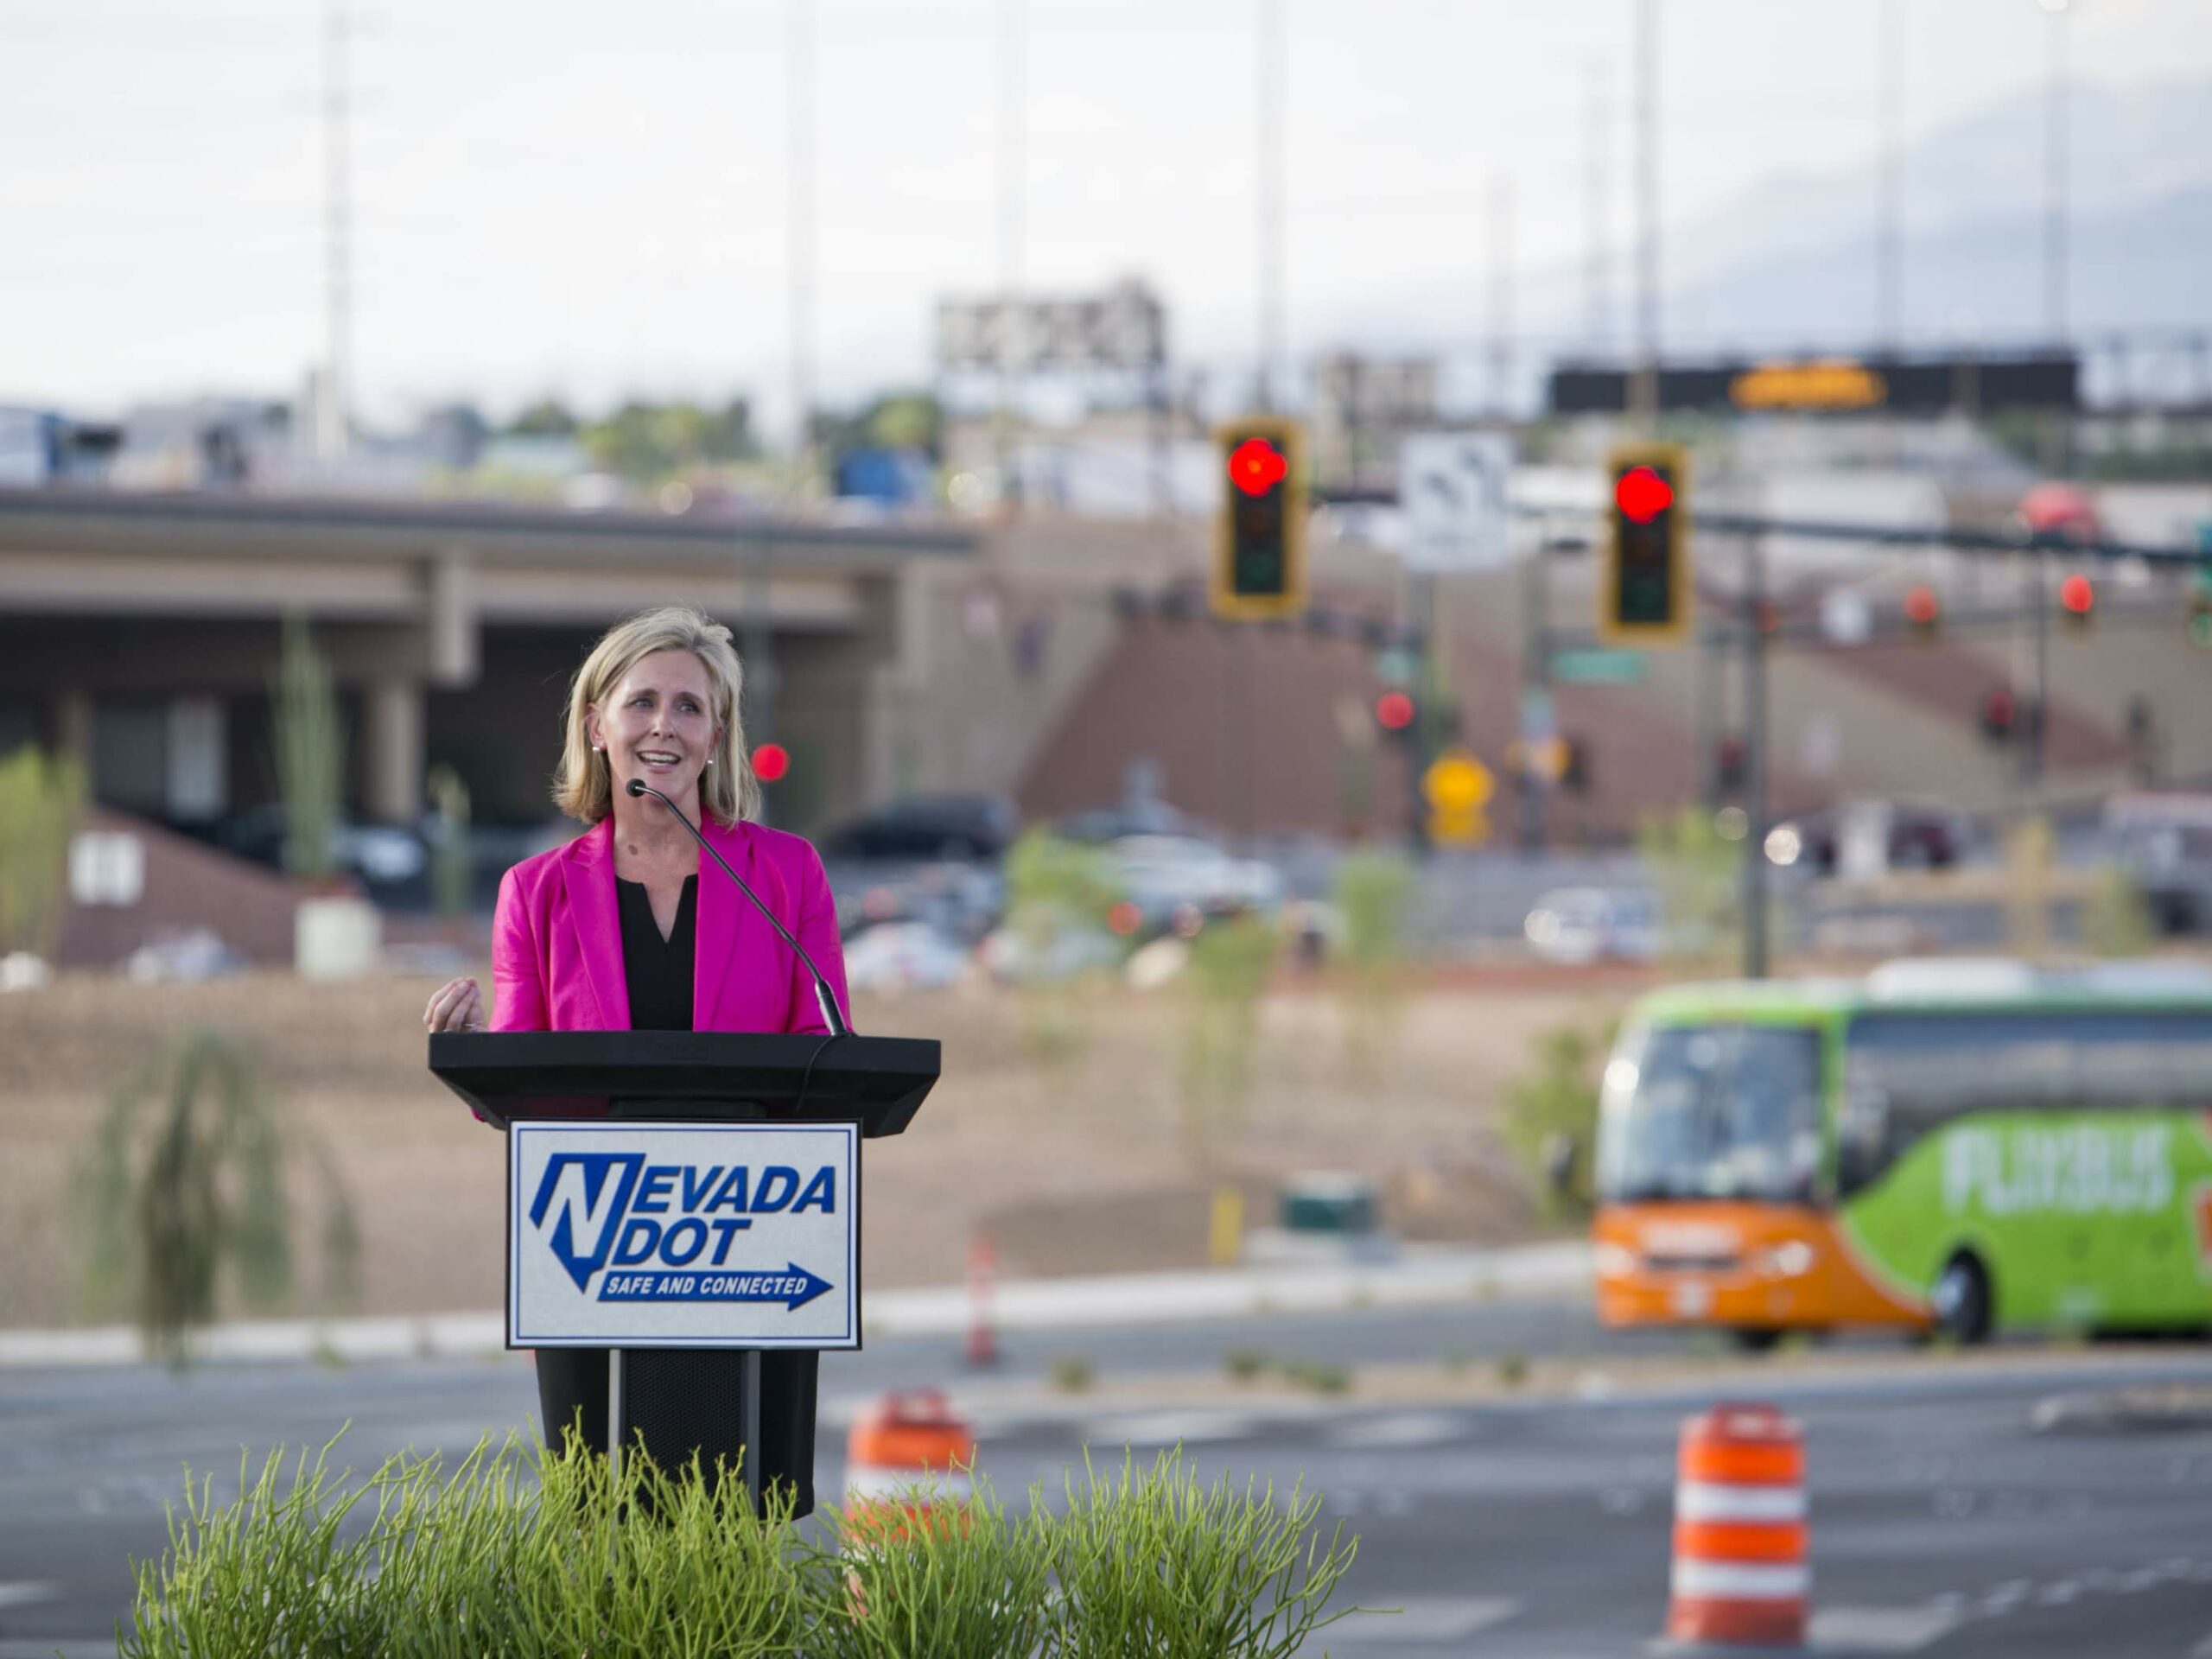 NDOT Director Kristina Swallow speaks during the Project Neon Grand Finale event in downtown Las Vegas on Thursday, Aug. 8, 2019.